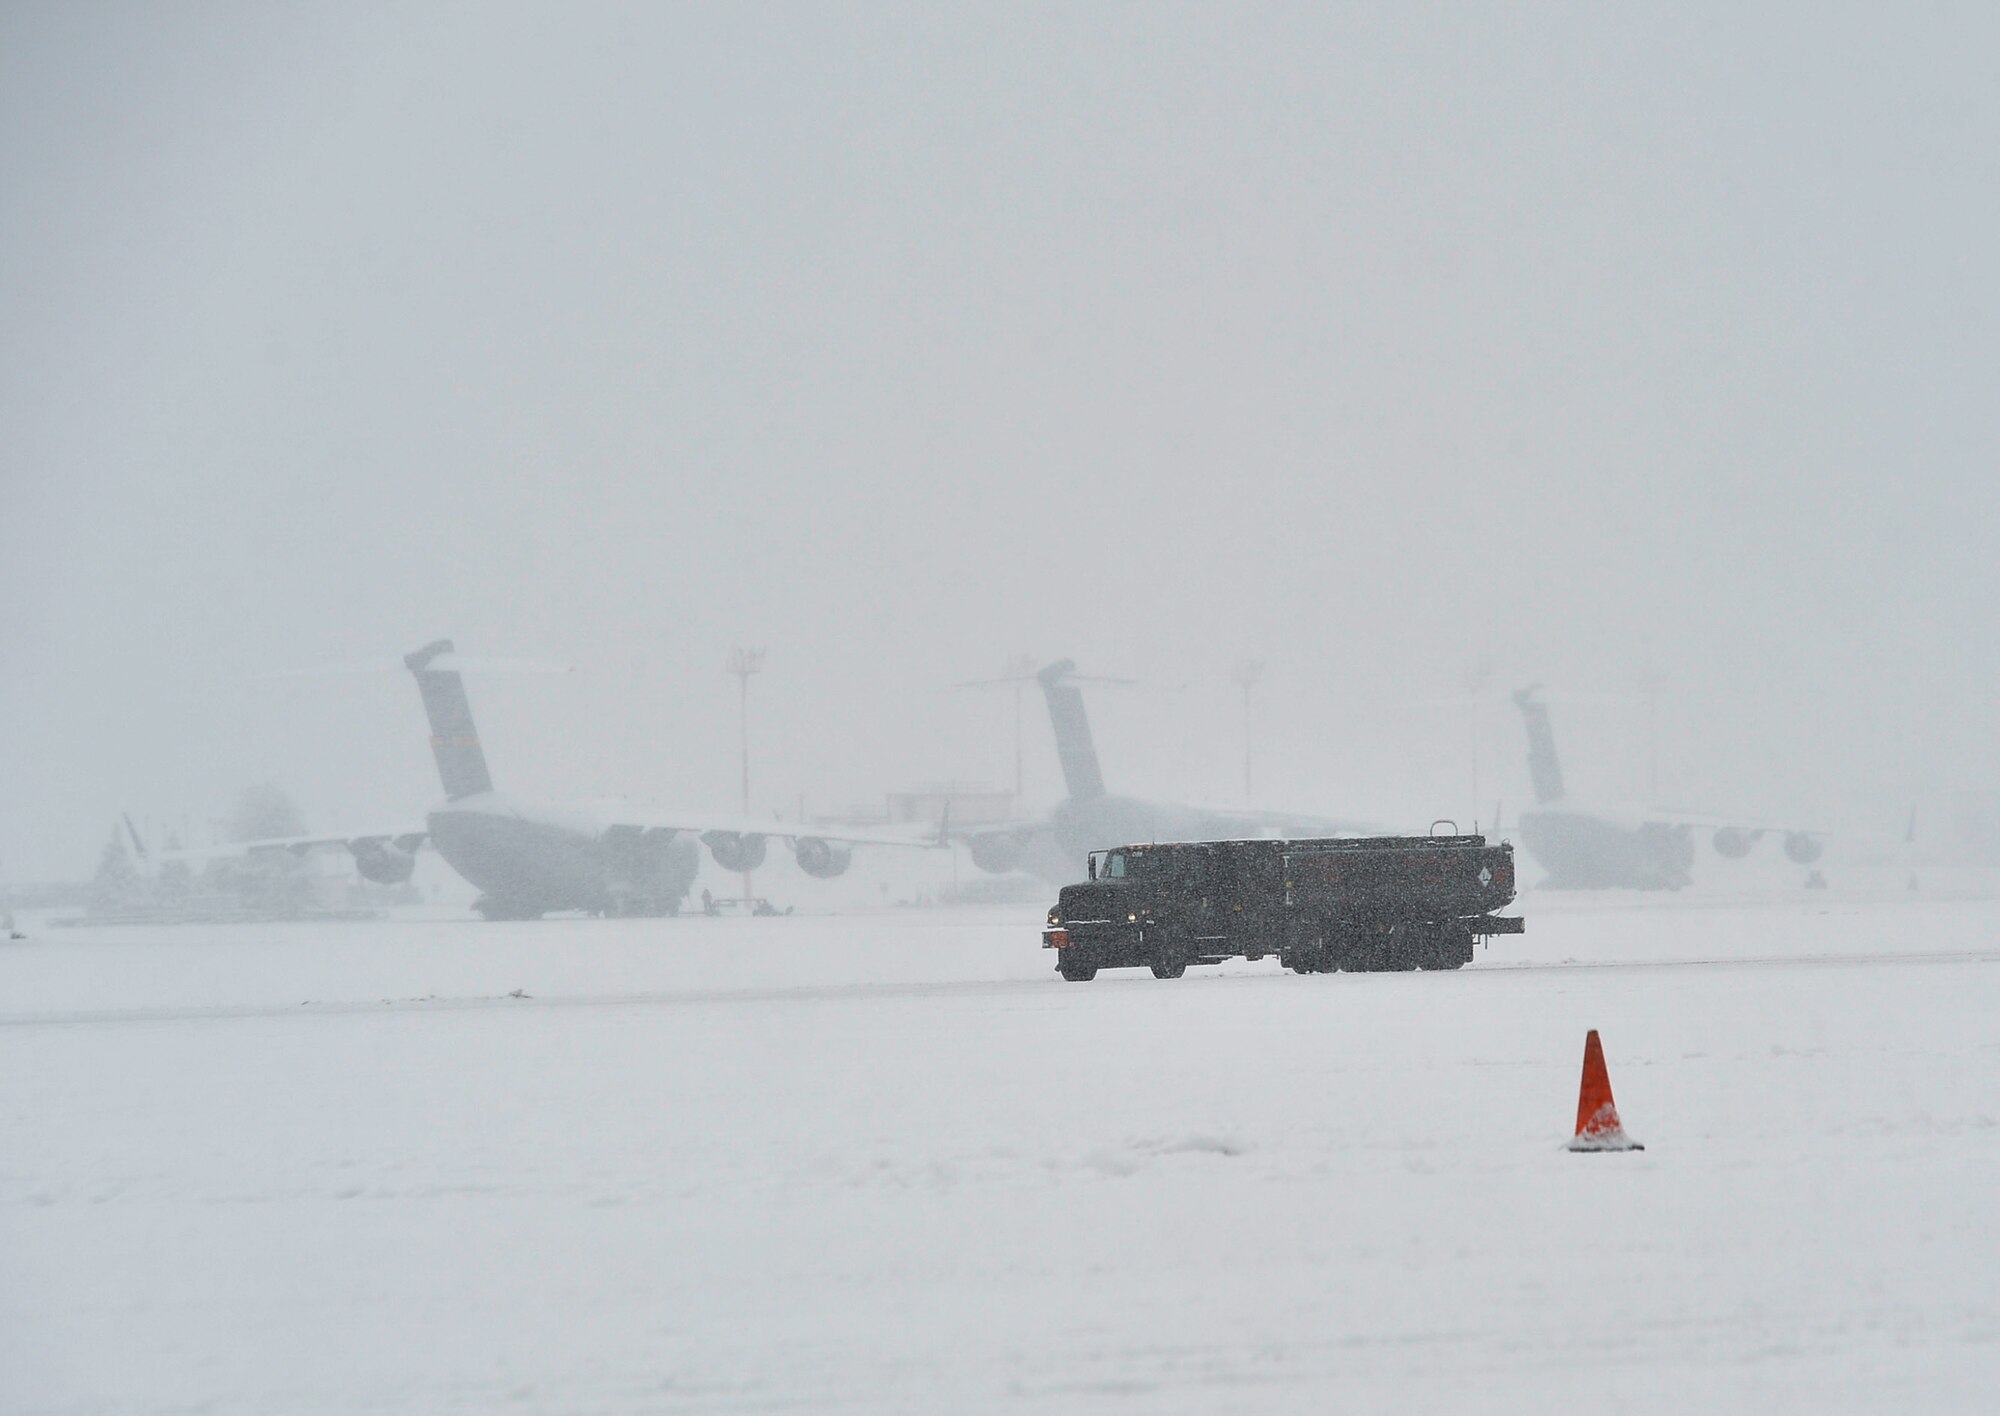 A military fuel truck drives on the flightline at Ramstein Air Base, Germany, Jan. 10, 2017. The Kaiserslautern Military Community received a record snowfall of approximately 3 1/2 inches in one day, making it the largest snowfall in a 24-hour period in the area since 2009. Local weather studies report that the state of Rheinland-Pfalz receives an average of 24.4 inches of precipitation each year. (U.S. Air Force photo by Airman 1st Class Joshua Magbanua)